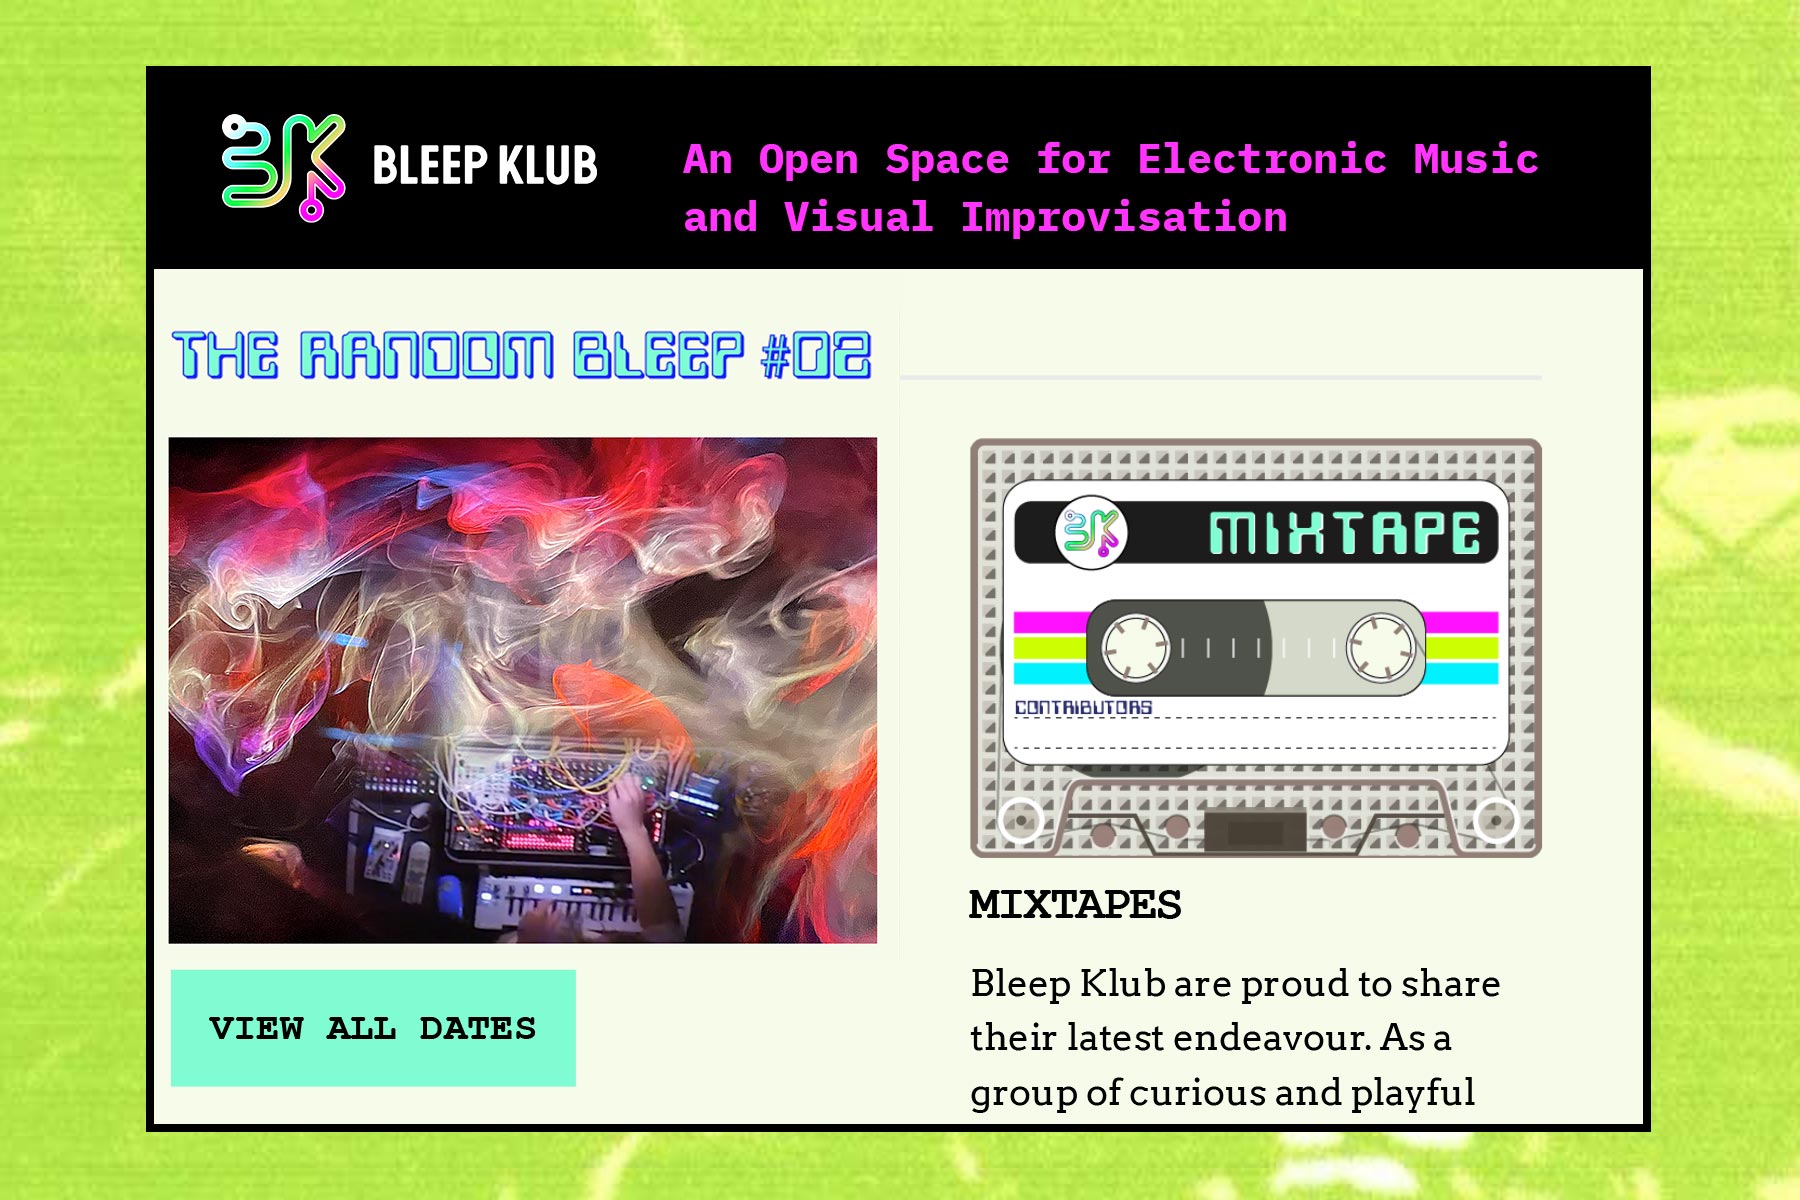 didier.co.uk - Web design, Graphic design and artwork for the music industry - Case study: Bleep Klub MailChimp template design